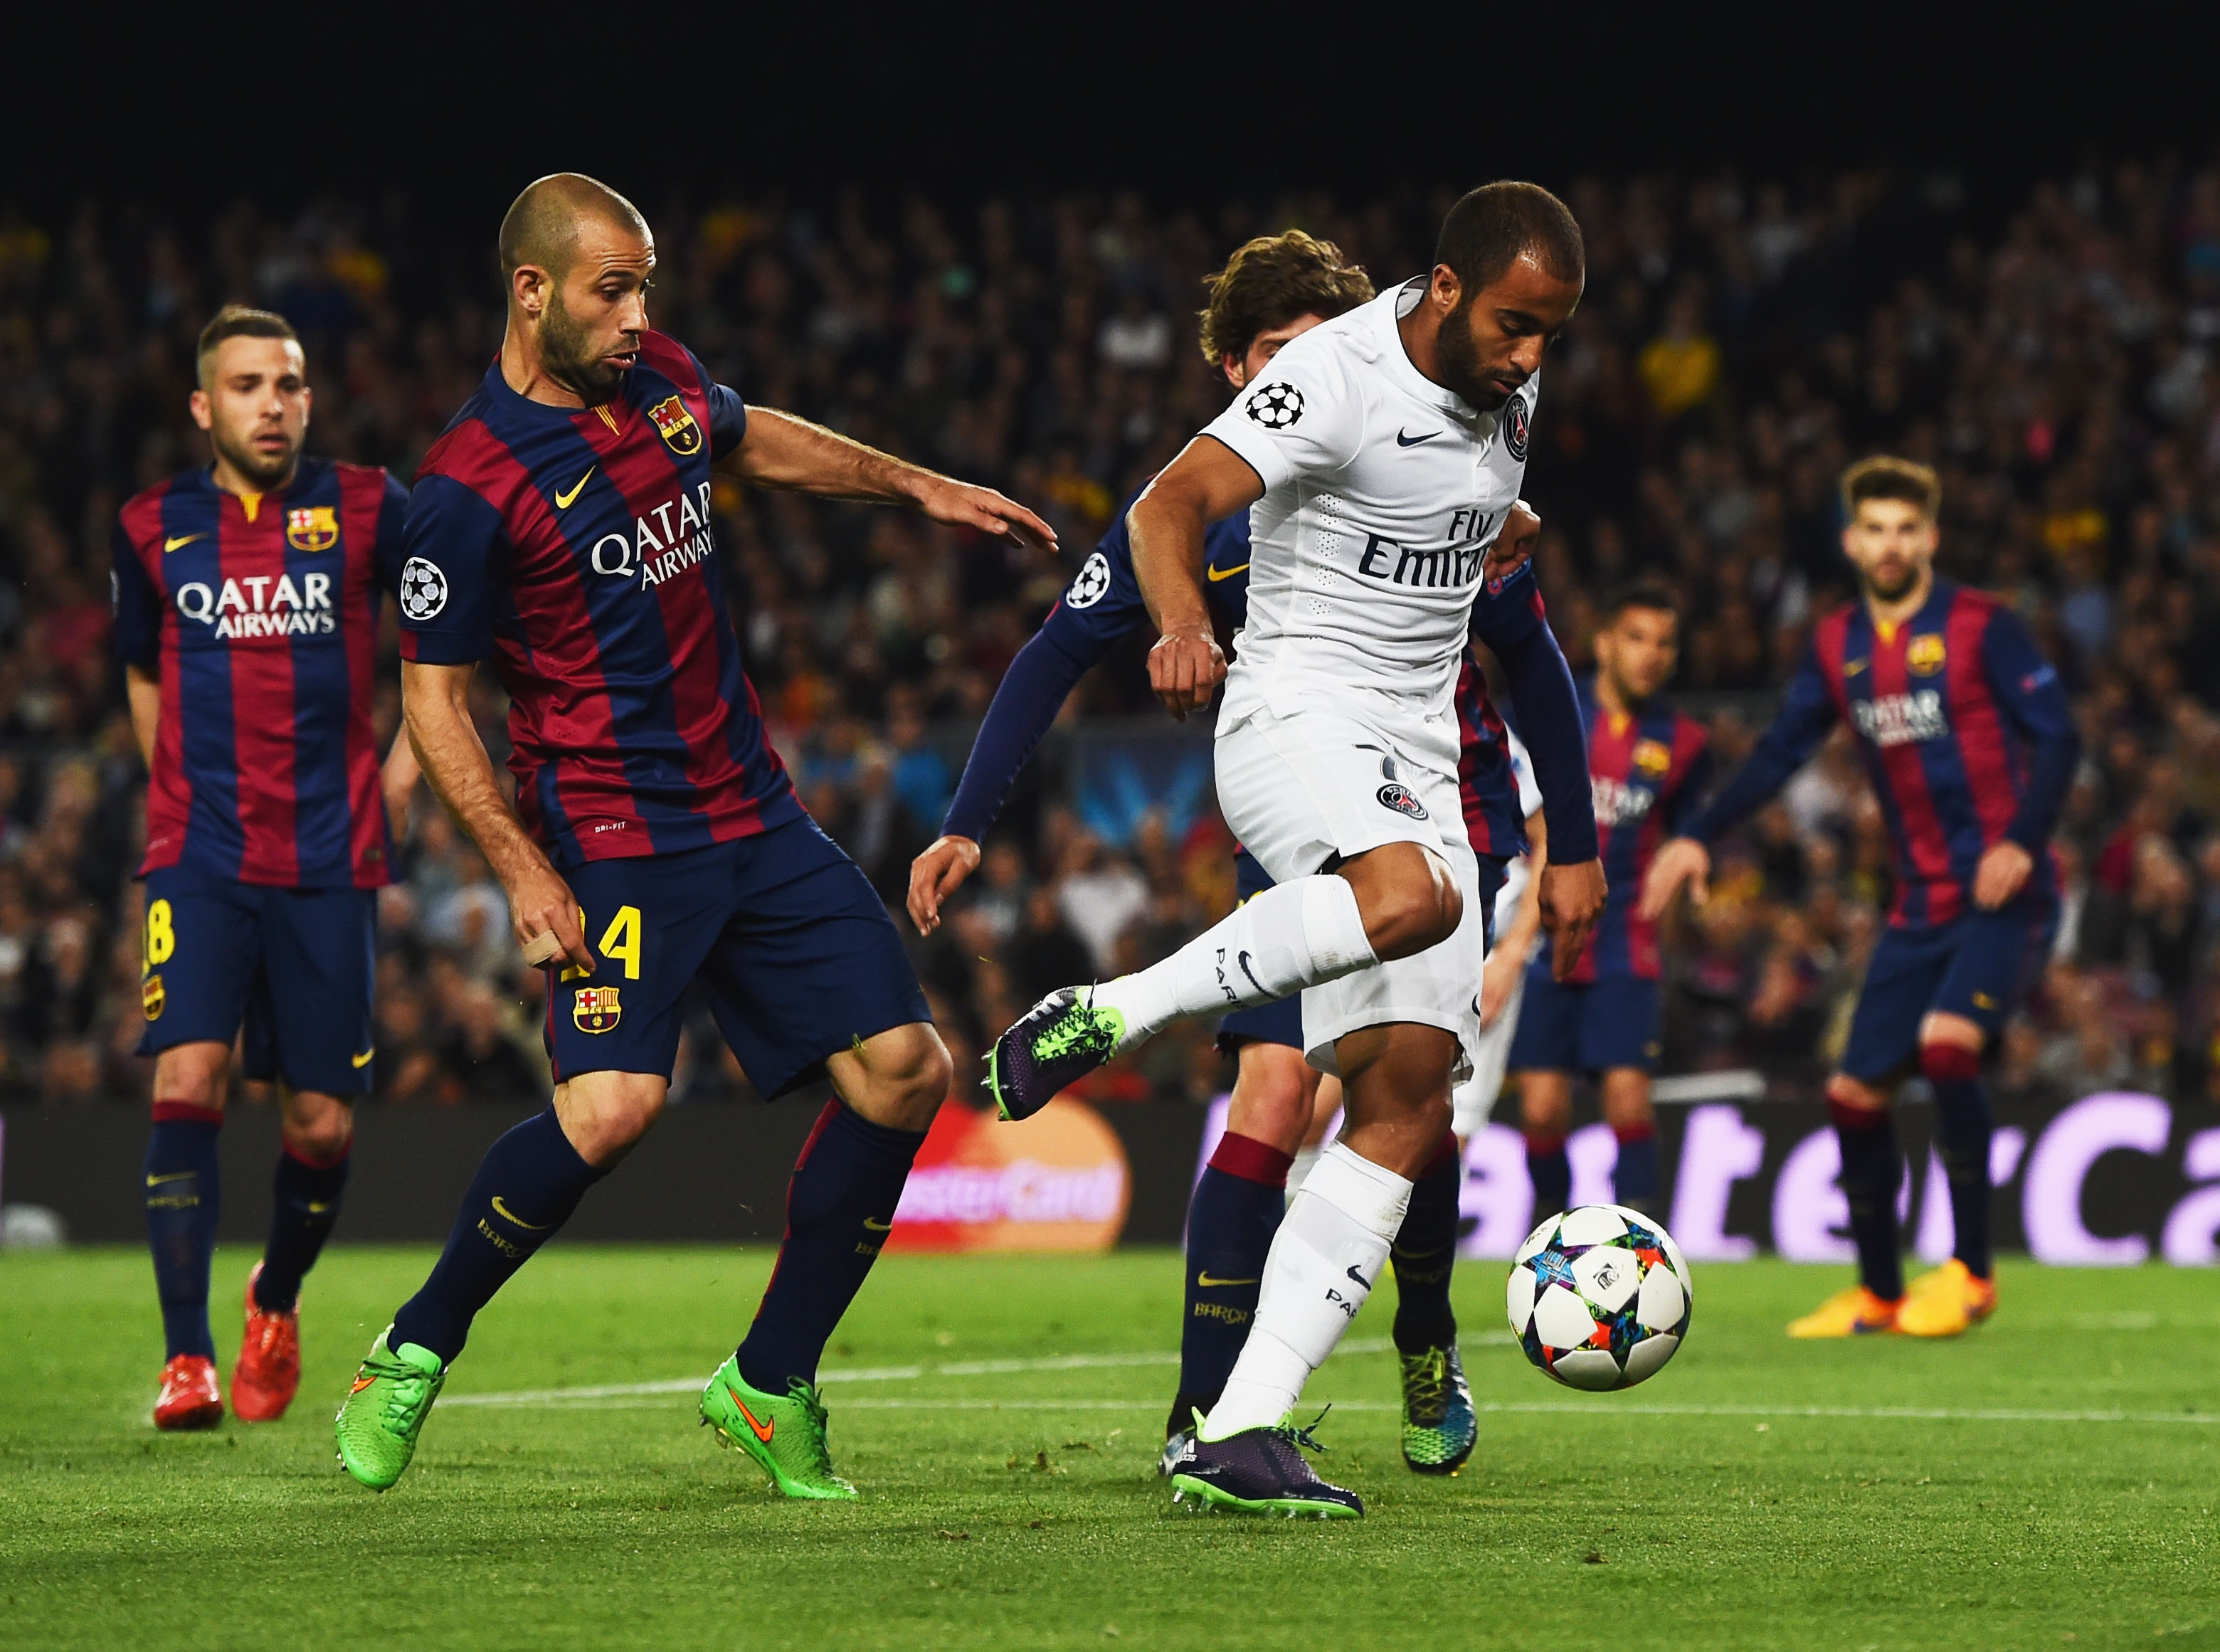 BARCELONA, SPAIN - APRIL 21:  Lucas of PSG takes on Javier Mascherano and Sergi Roberto of Barcelona during the UEFA Champions League Quarter Final second leg match between FC Barcelona and Paris Saint-Germain at Camp Nou on April 21, 2015 in Barcelona, Spain.  (Photo by David Ramos/Getty Images)